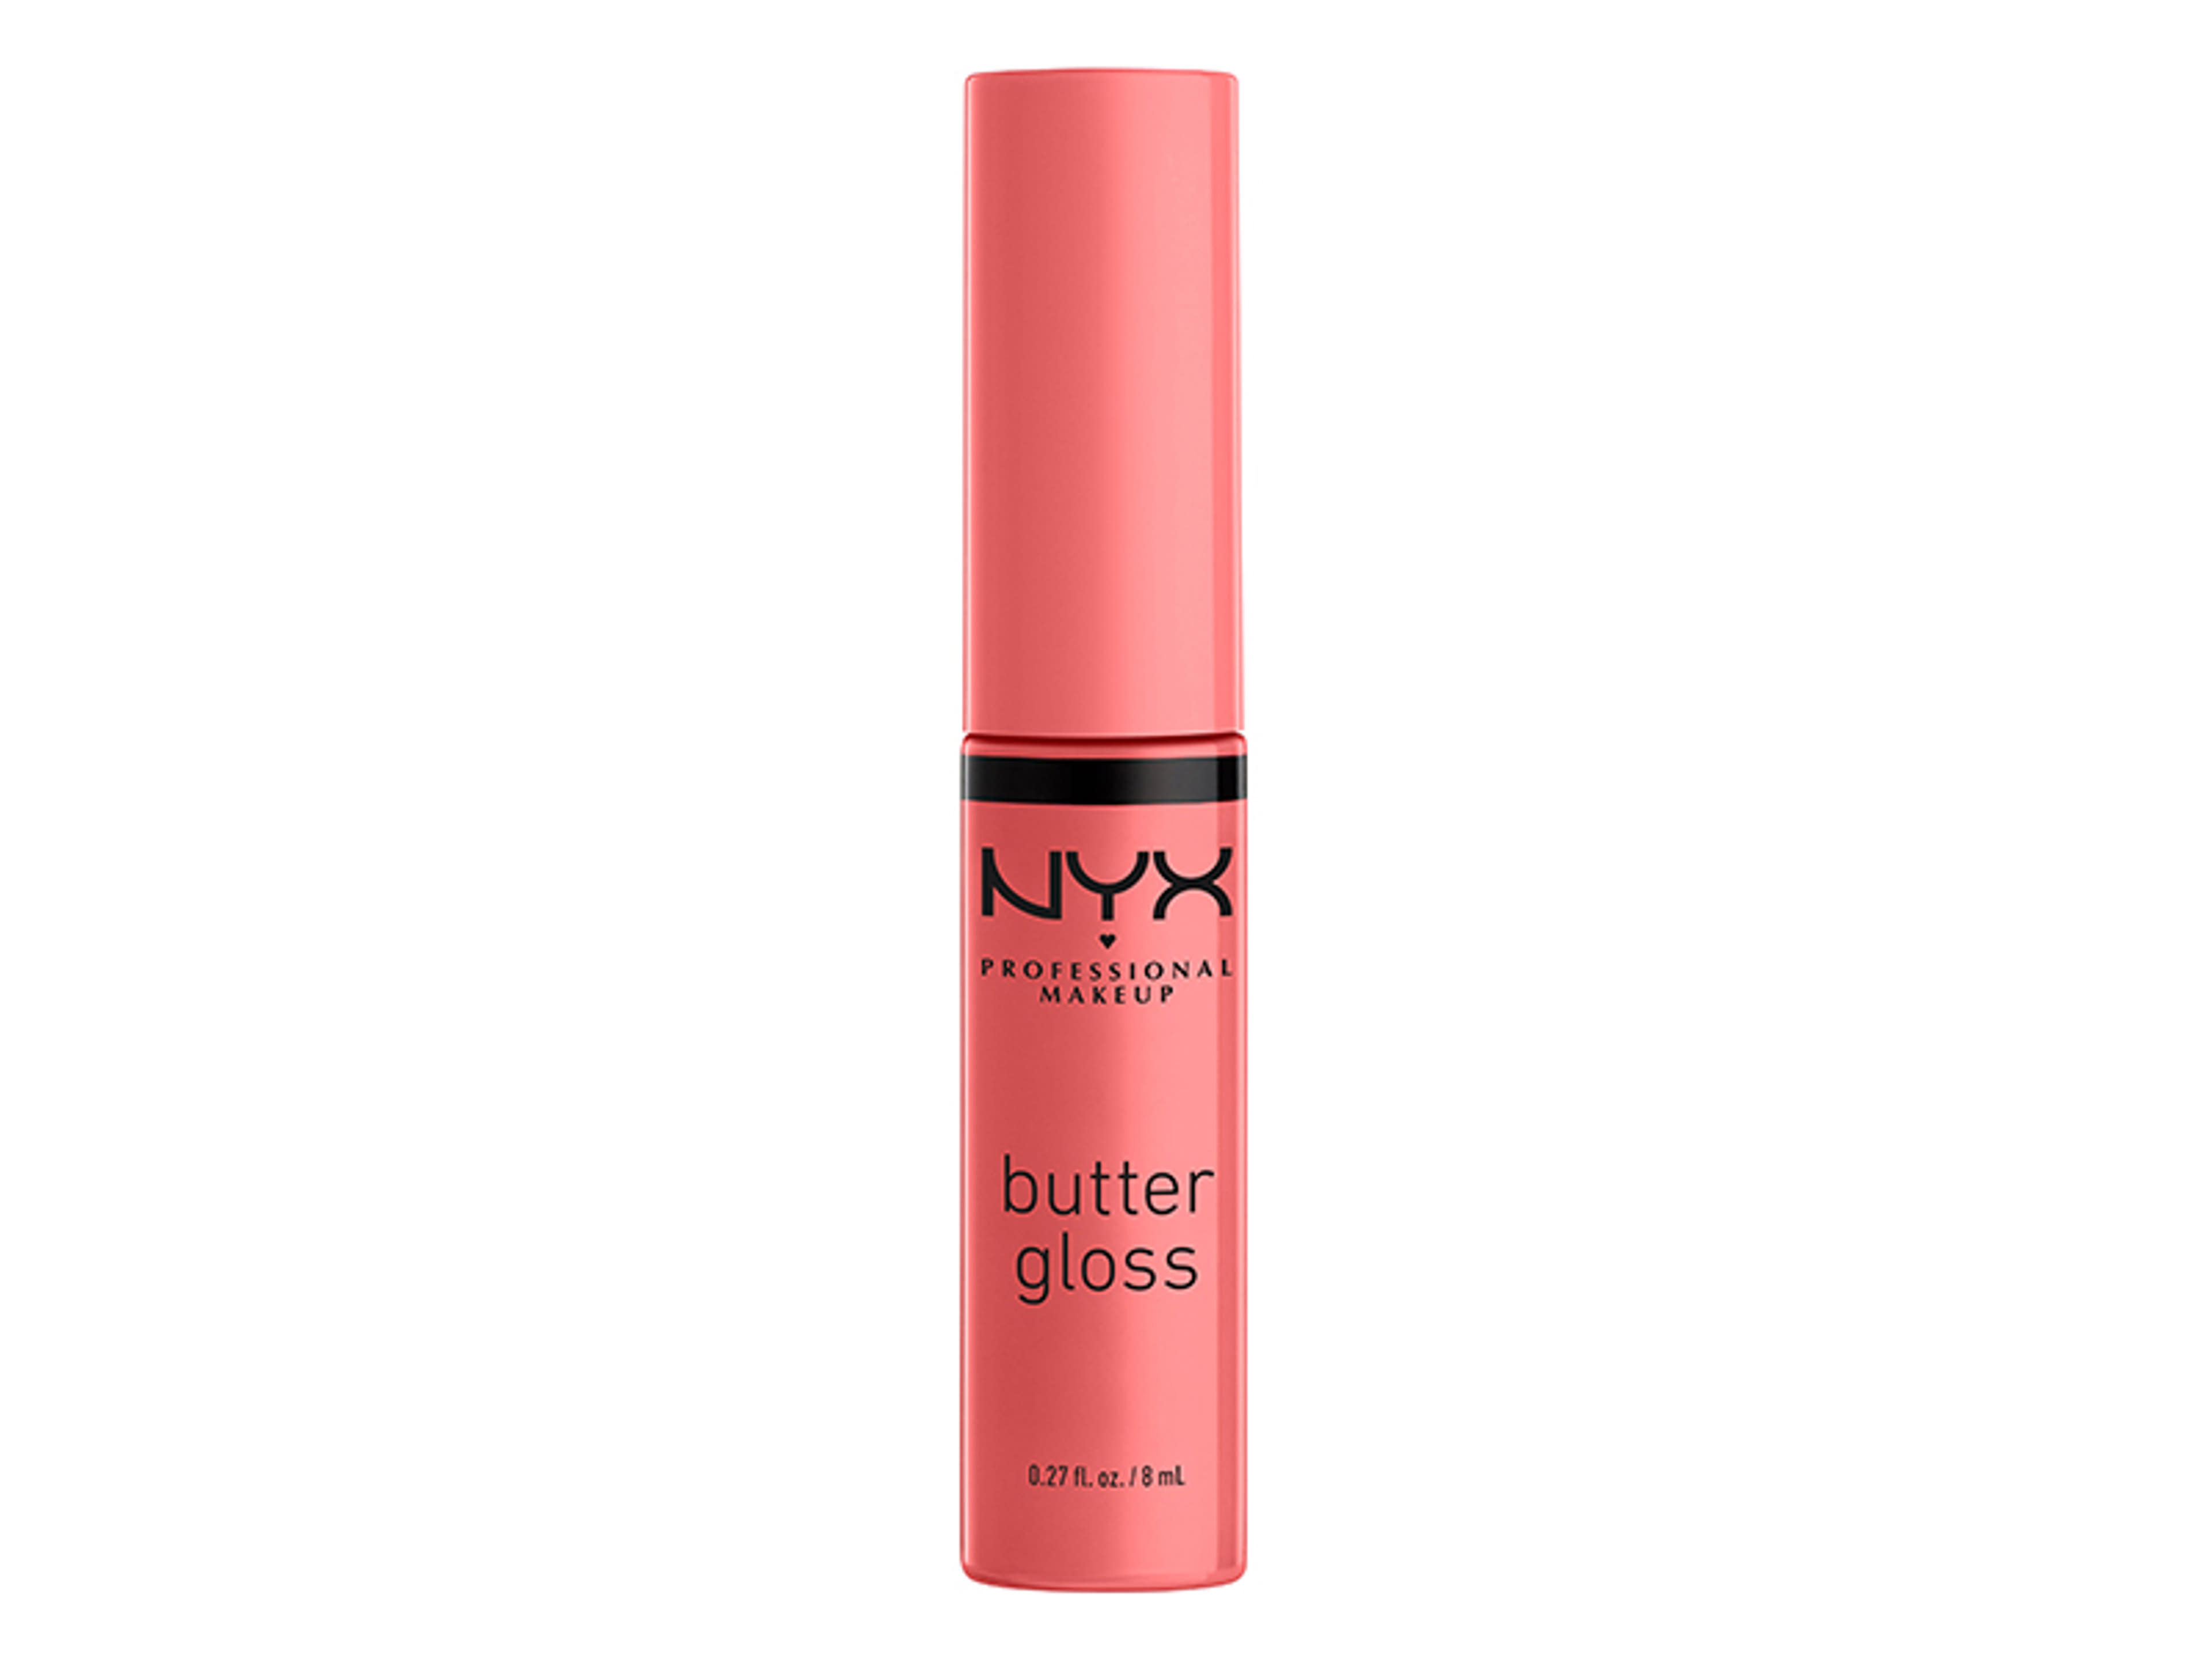 NYX Professional Makeup Butter Gloss ajakfény, Creme Brulee - 1 db